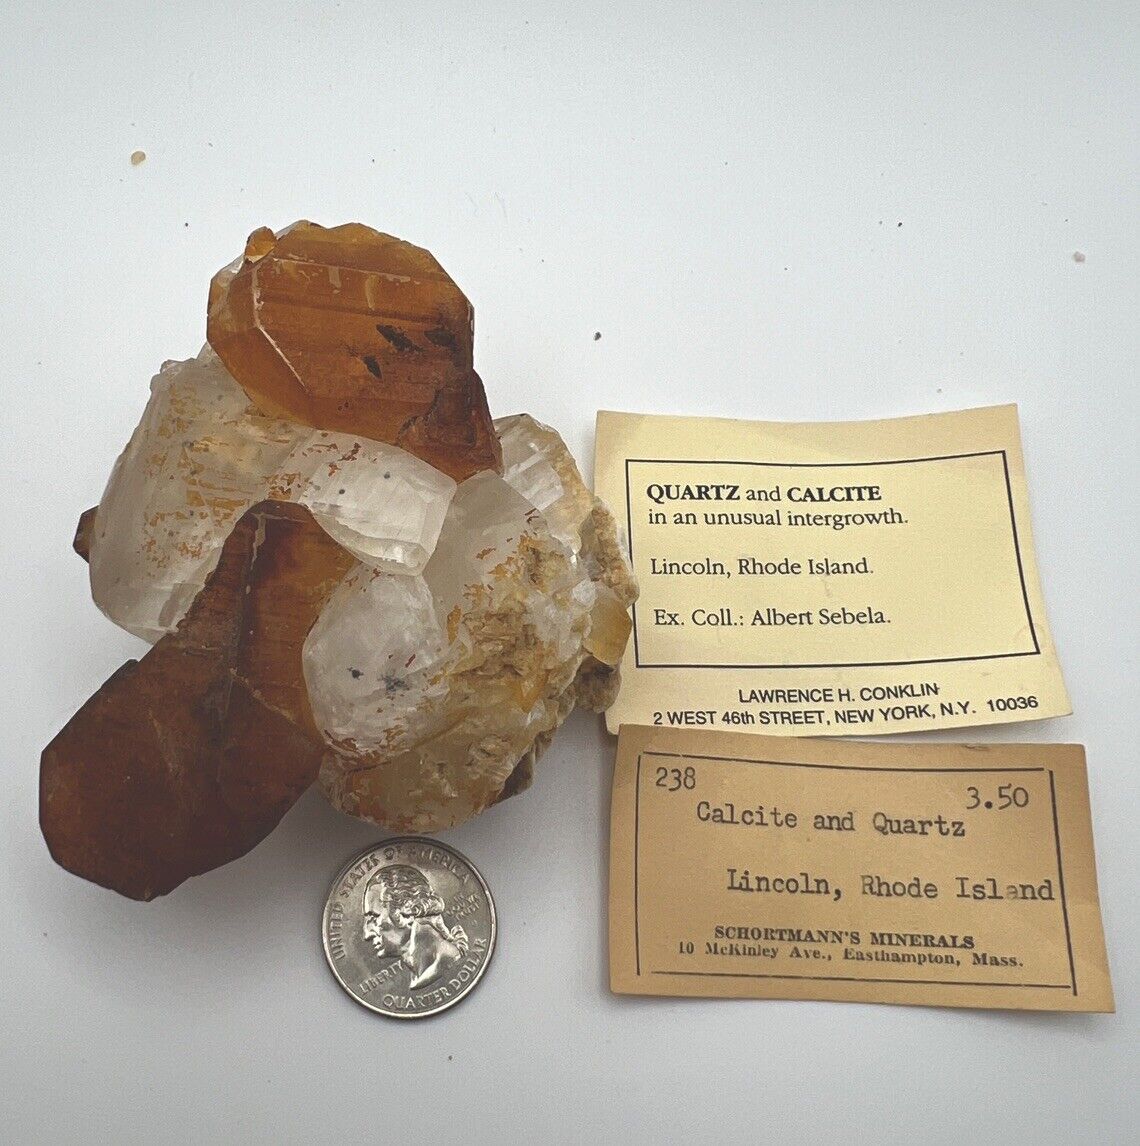 Absolutely wild calcite and quartz from Lincoln, Rhode Island, great provenance